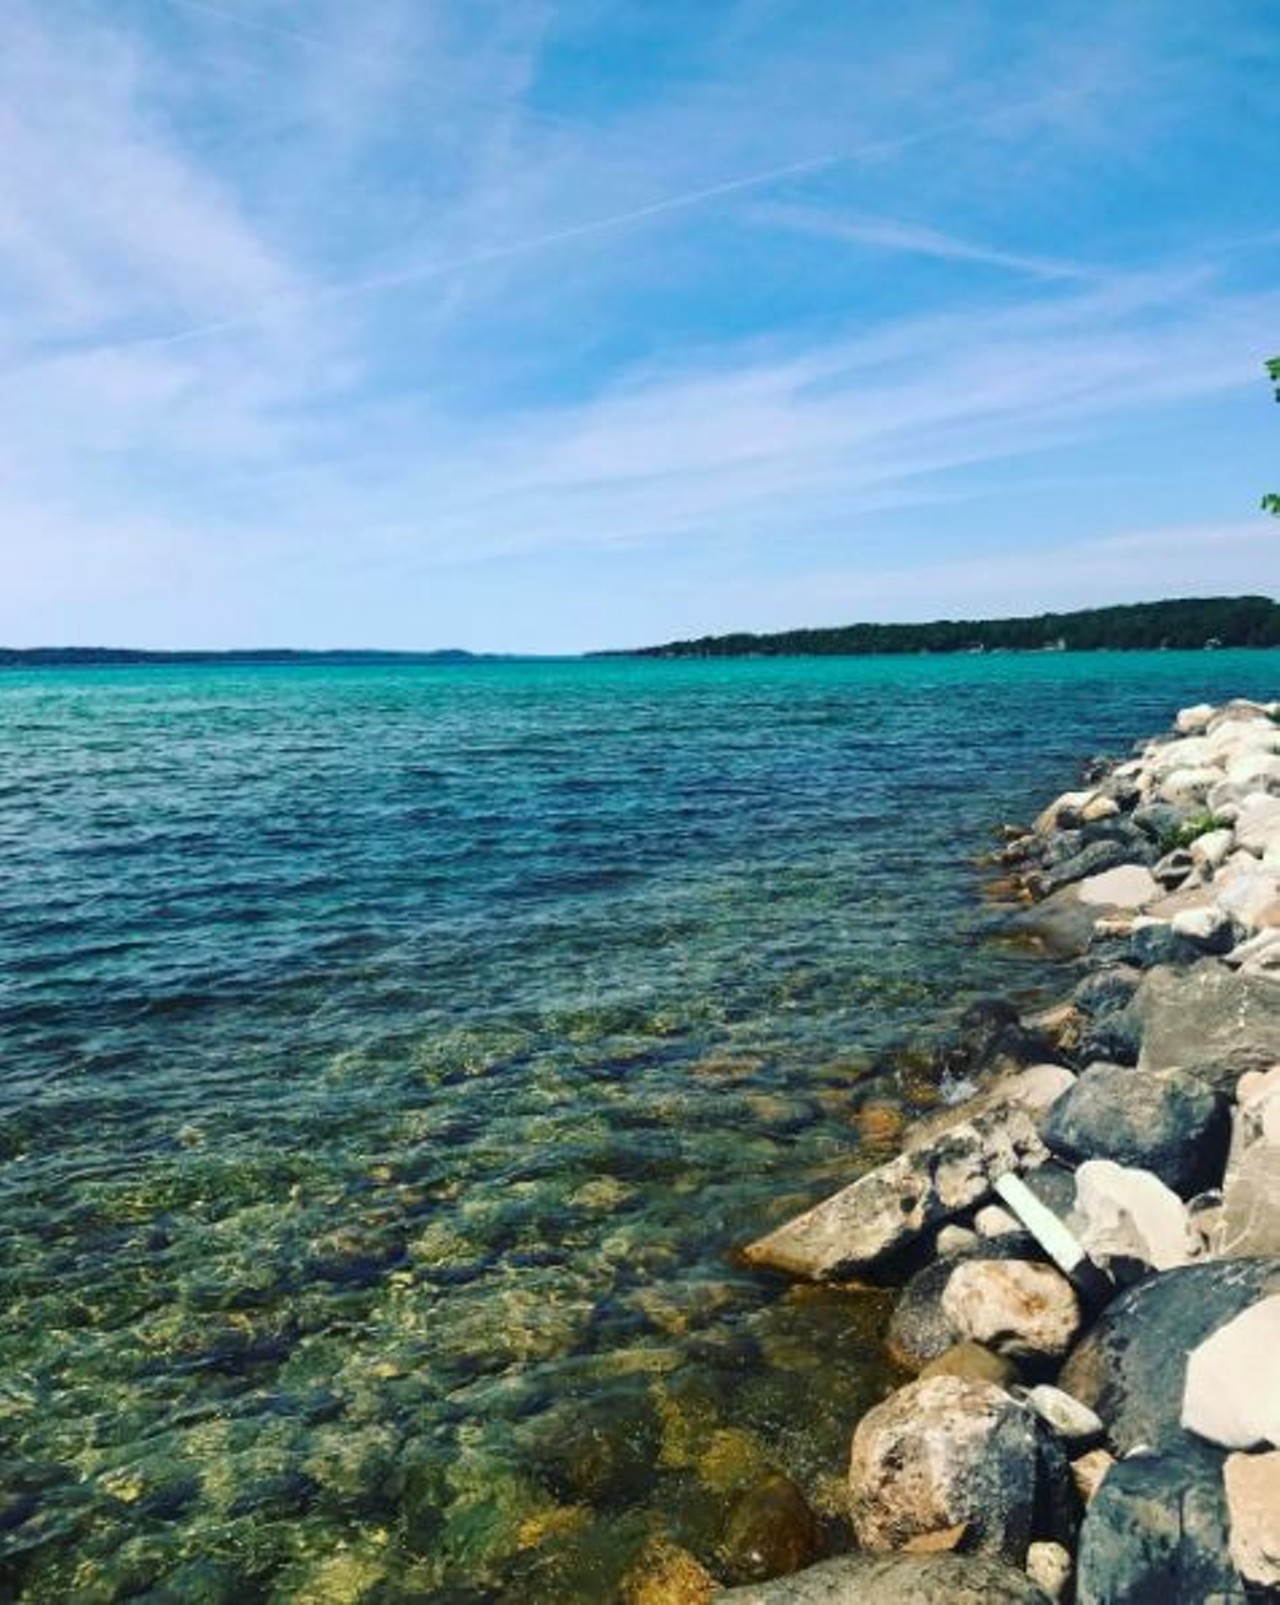 Torch Lake
Driving distance from Detroit: 4 hours and 10 minutes
If you haven&#146;t visited a 19 mile long lake, this is the one you&#146;ve been waiting for. From beaches to bask in the northern Michigan sun to an expansive area for watersports, this lake has something for everyone. Not to mention it is a stone throw&#146;s away from Grand Traverse Bay and Traverse City.
(Photo via IG user @mitten.girl.trxx)